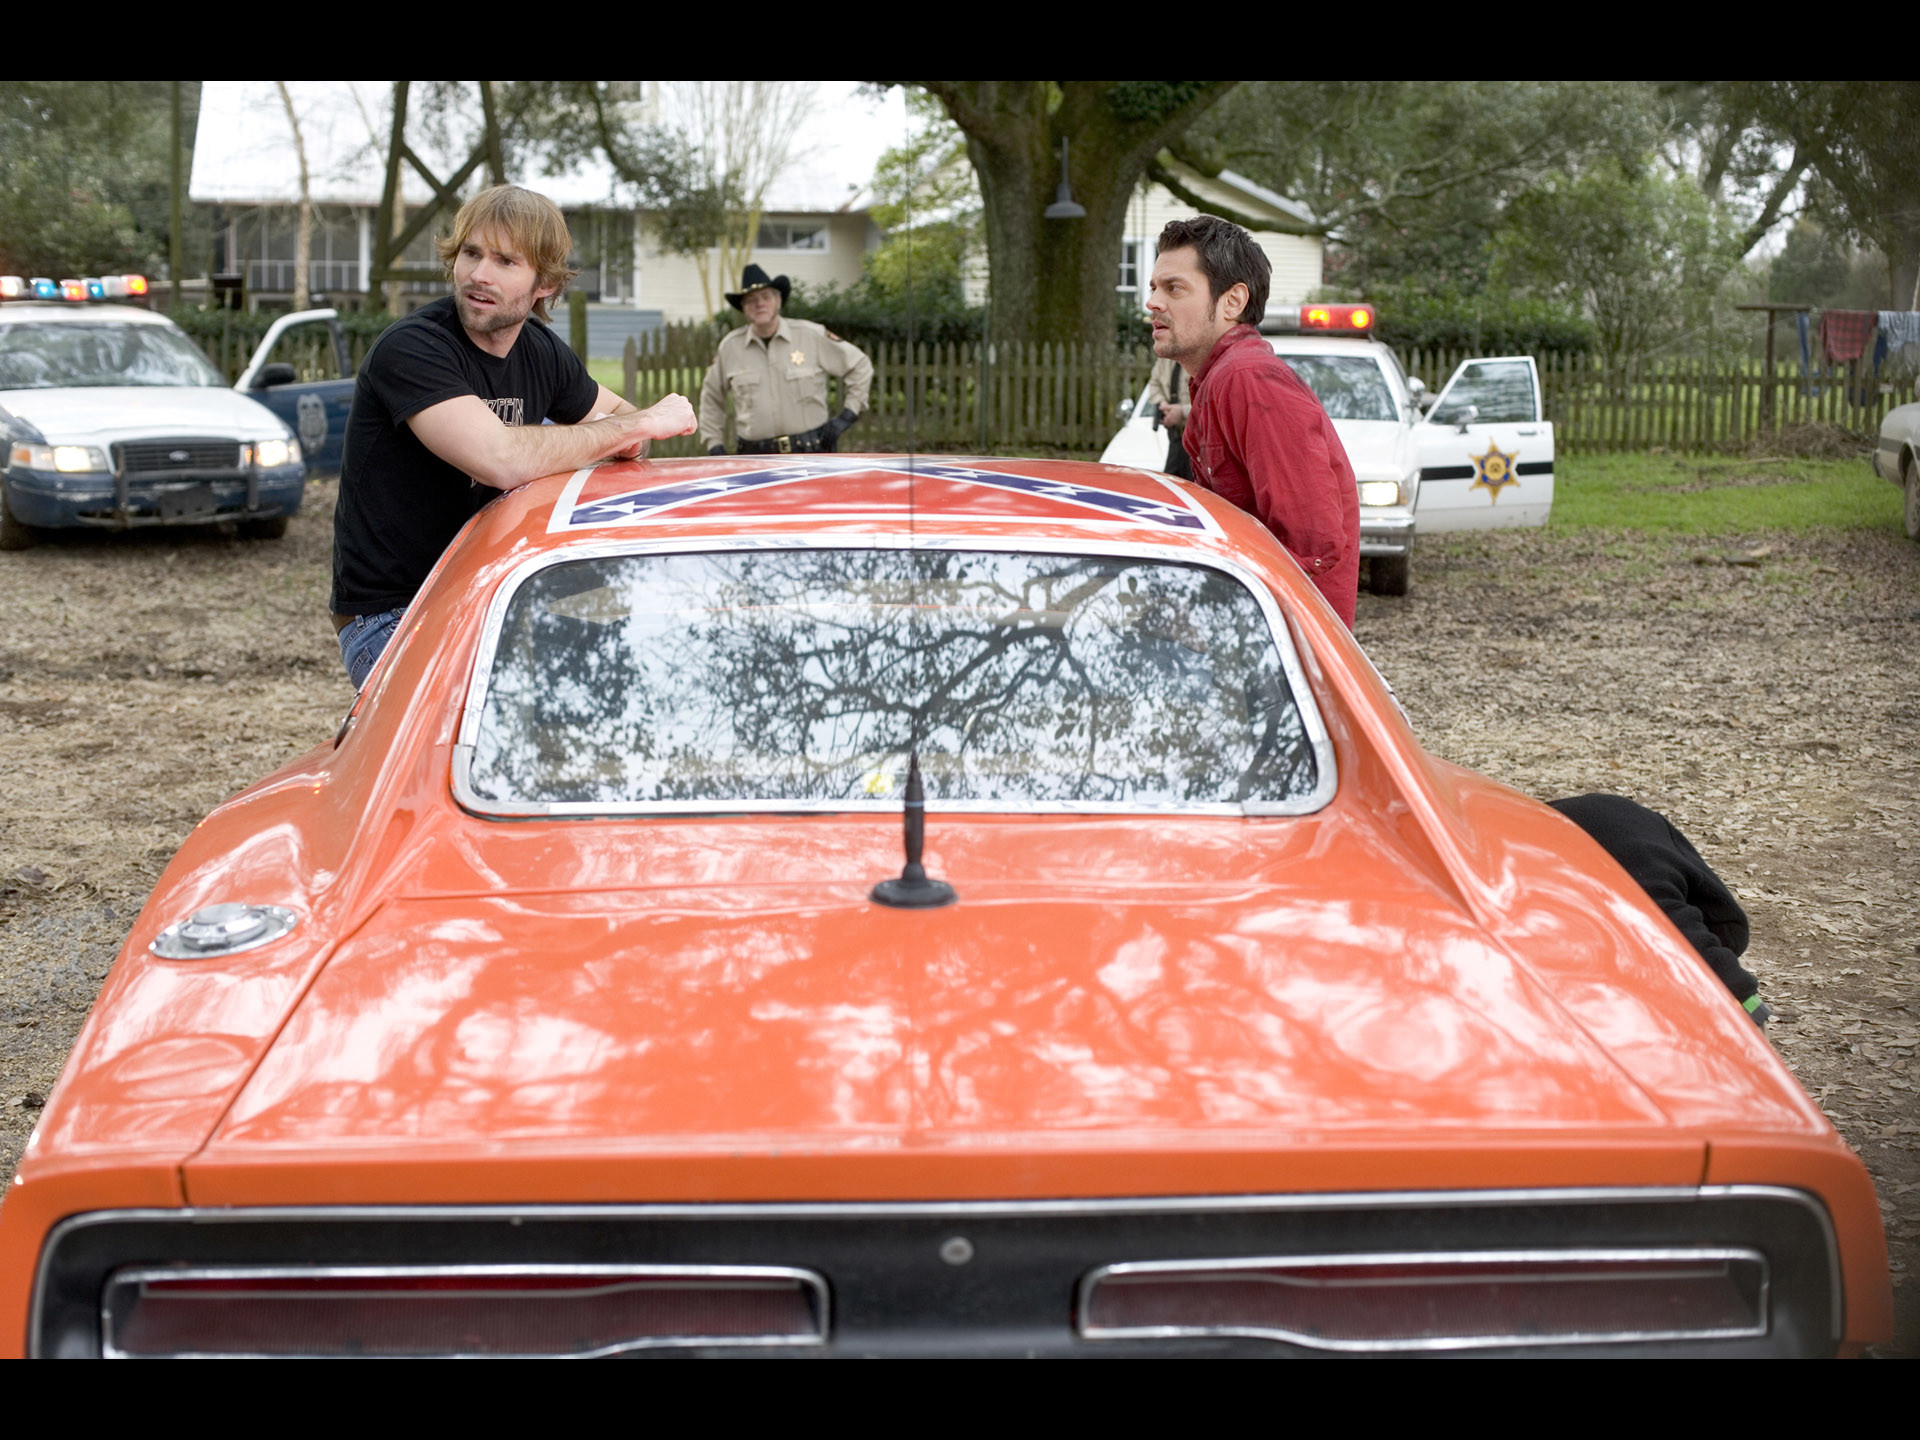 1920x1440 1969 Dodge Charger - General Lee from " The Dukes of Hazzard" Movie - Rear  - Seann William Scott & Johnny Knoxville -  Wallpaper